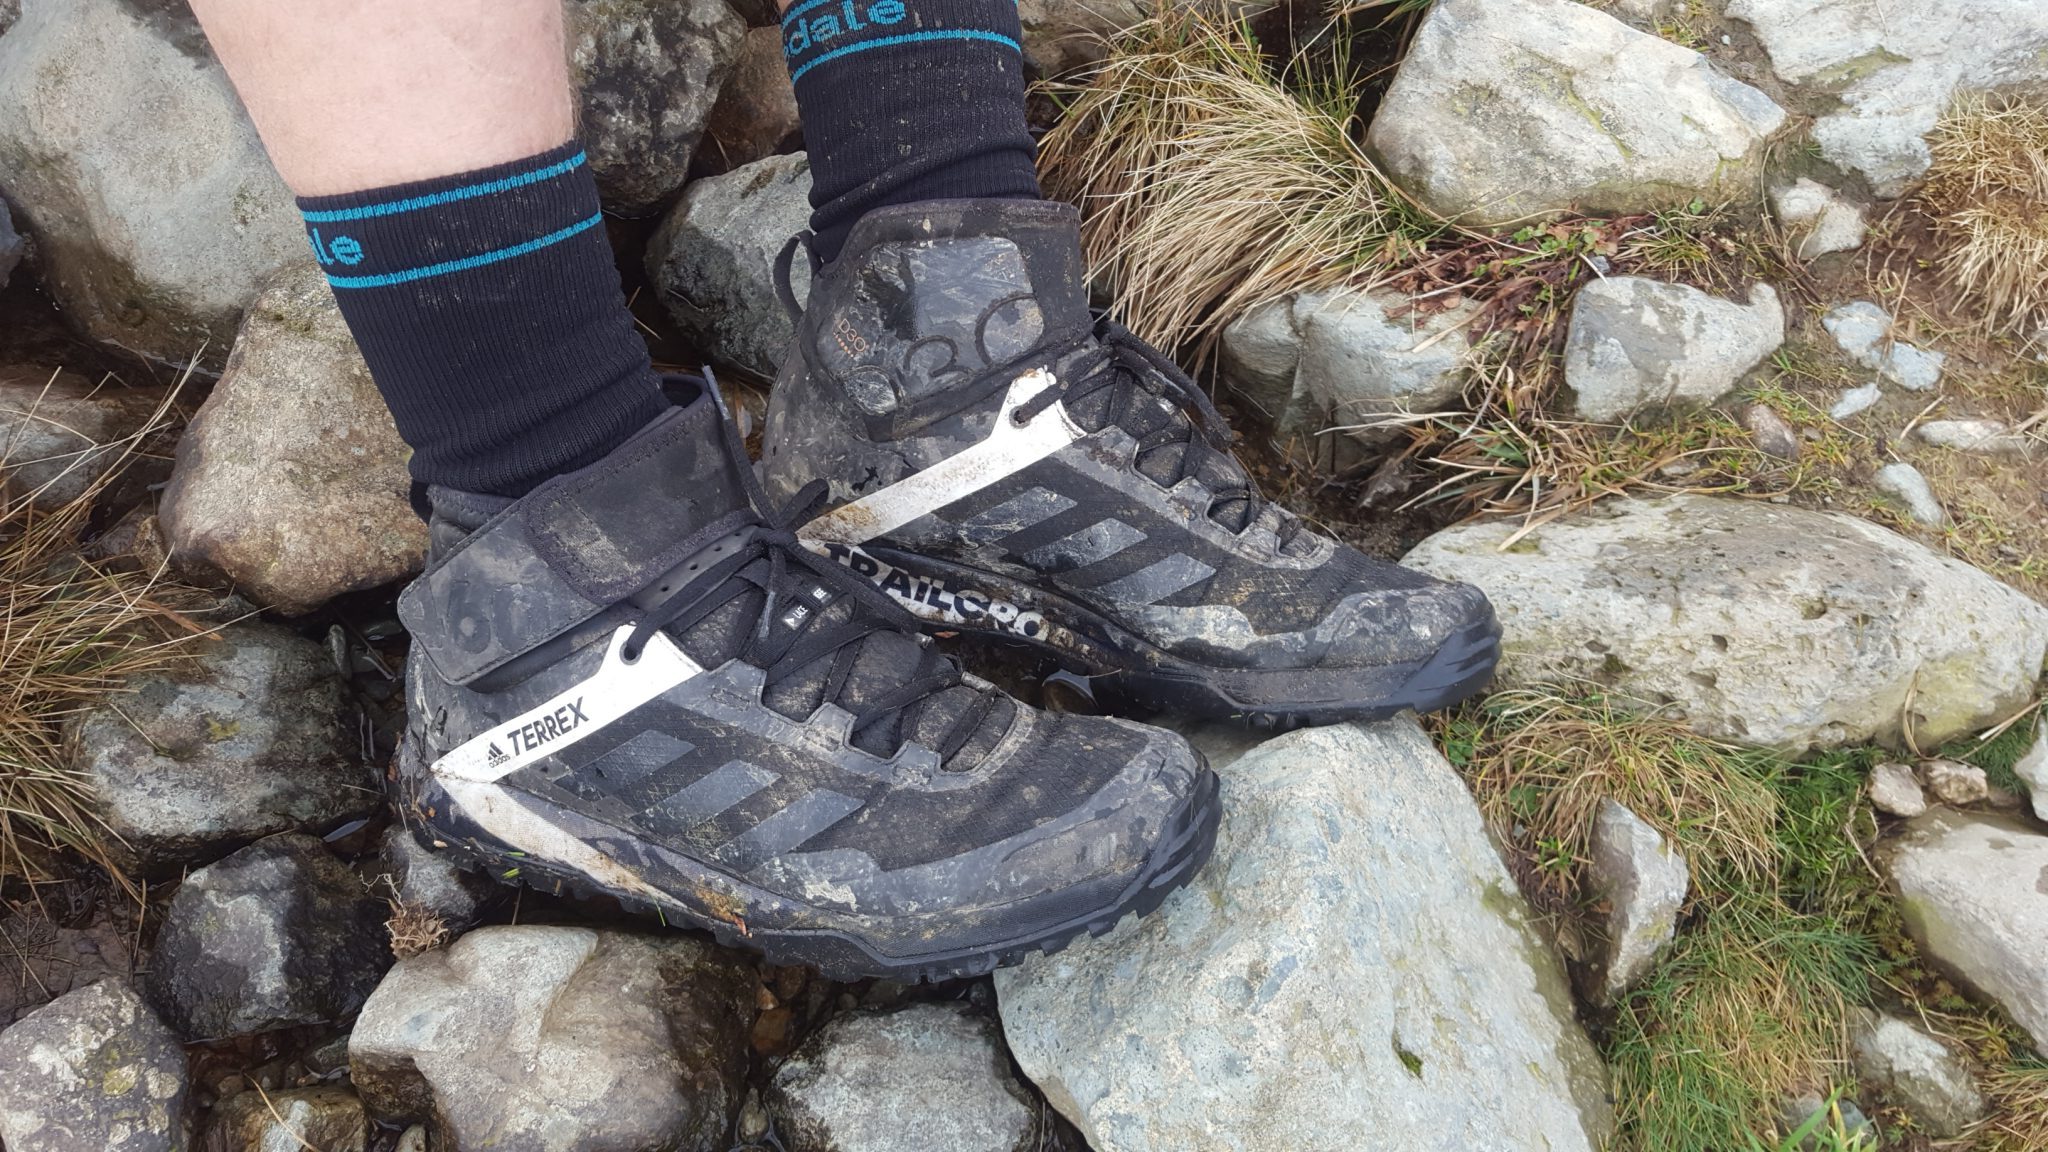 adidas terrex trail cross protect shoes